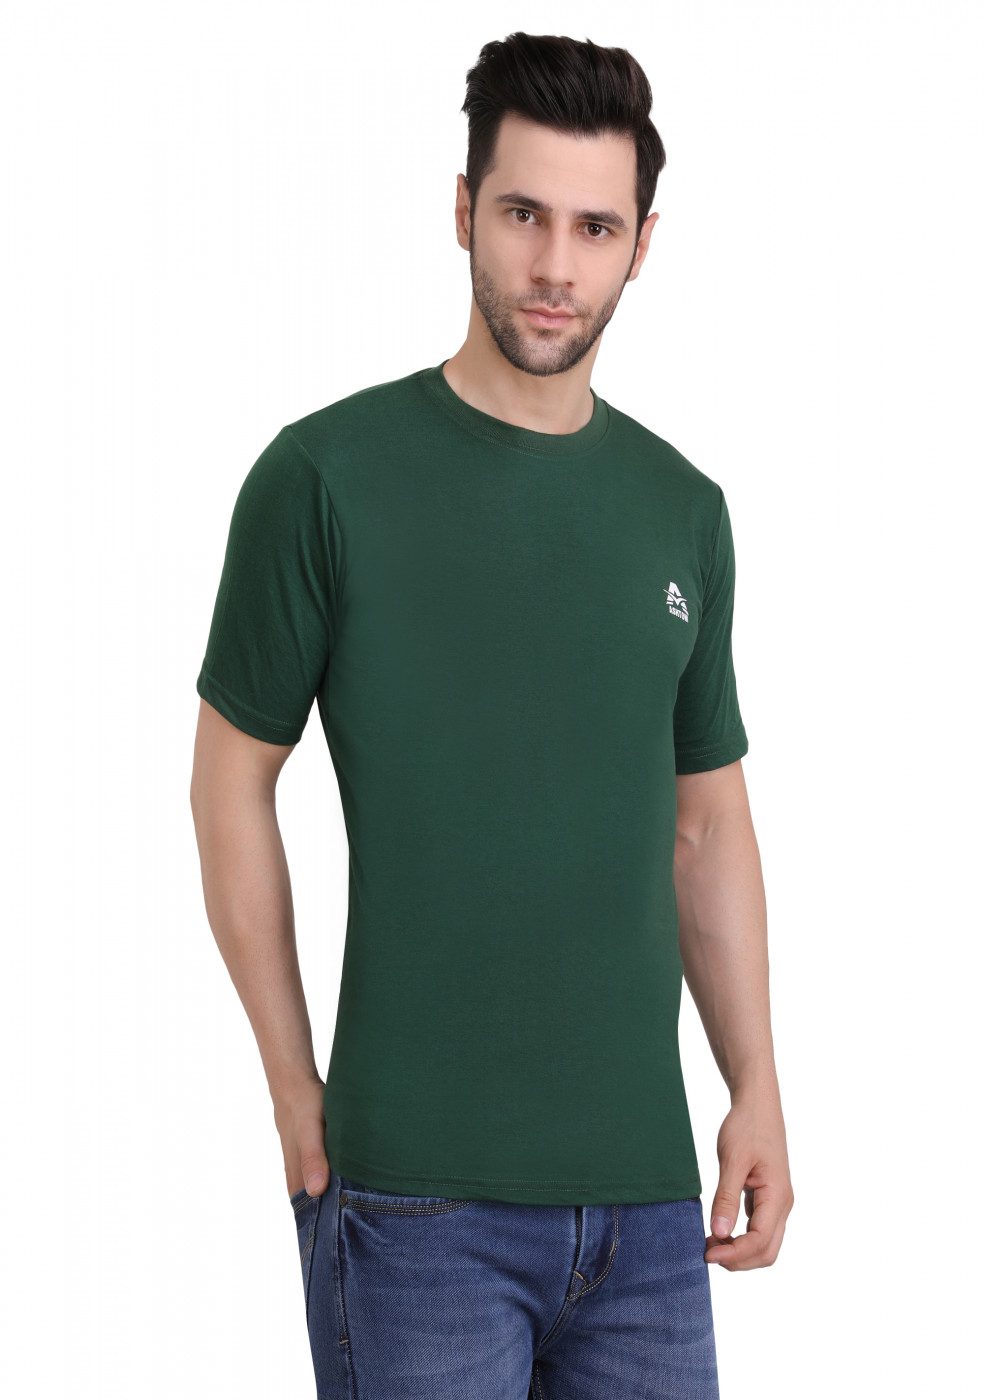 Green Slim Fit Cotton Round Neck T Shirt For Men